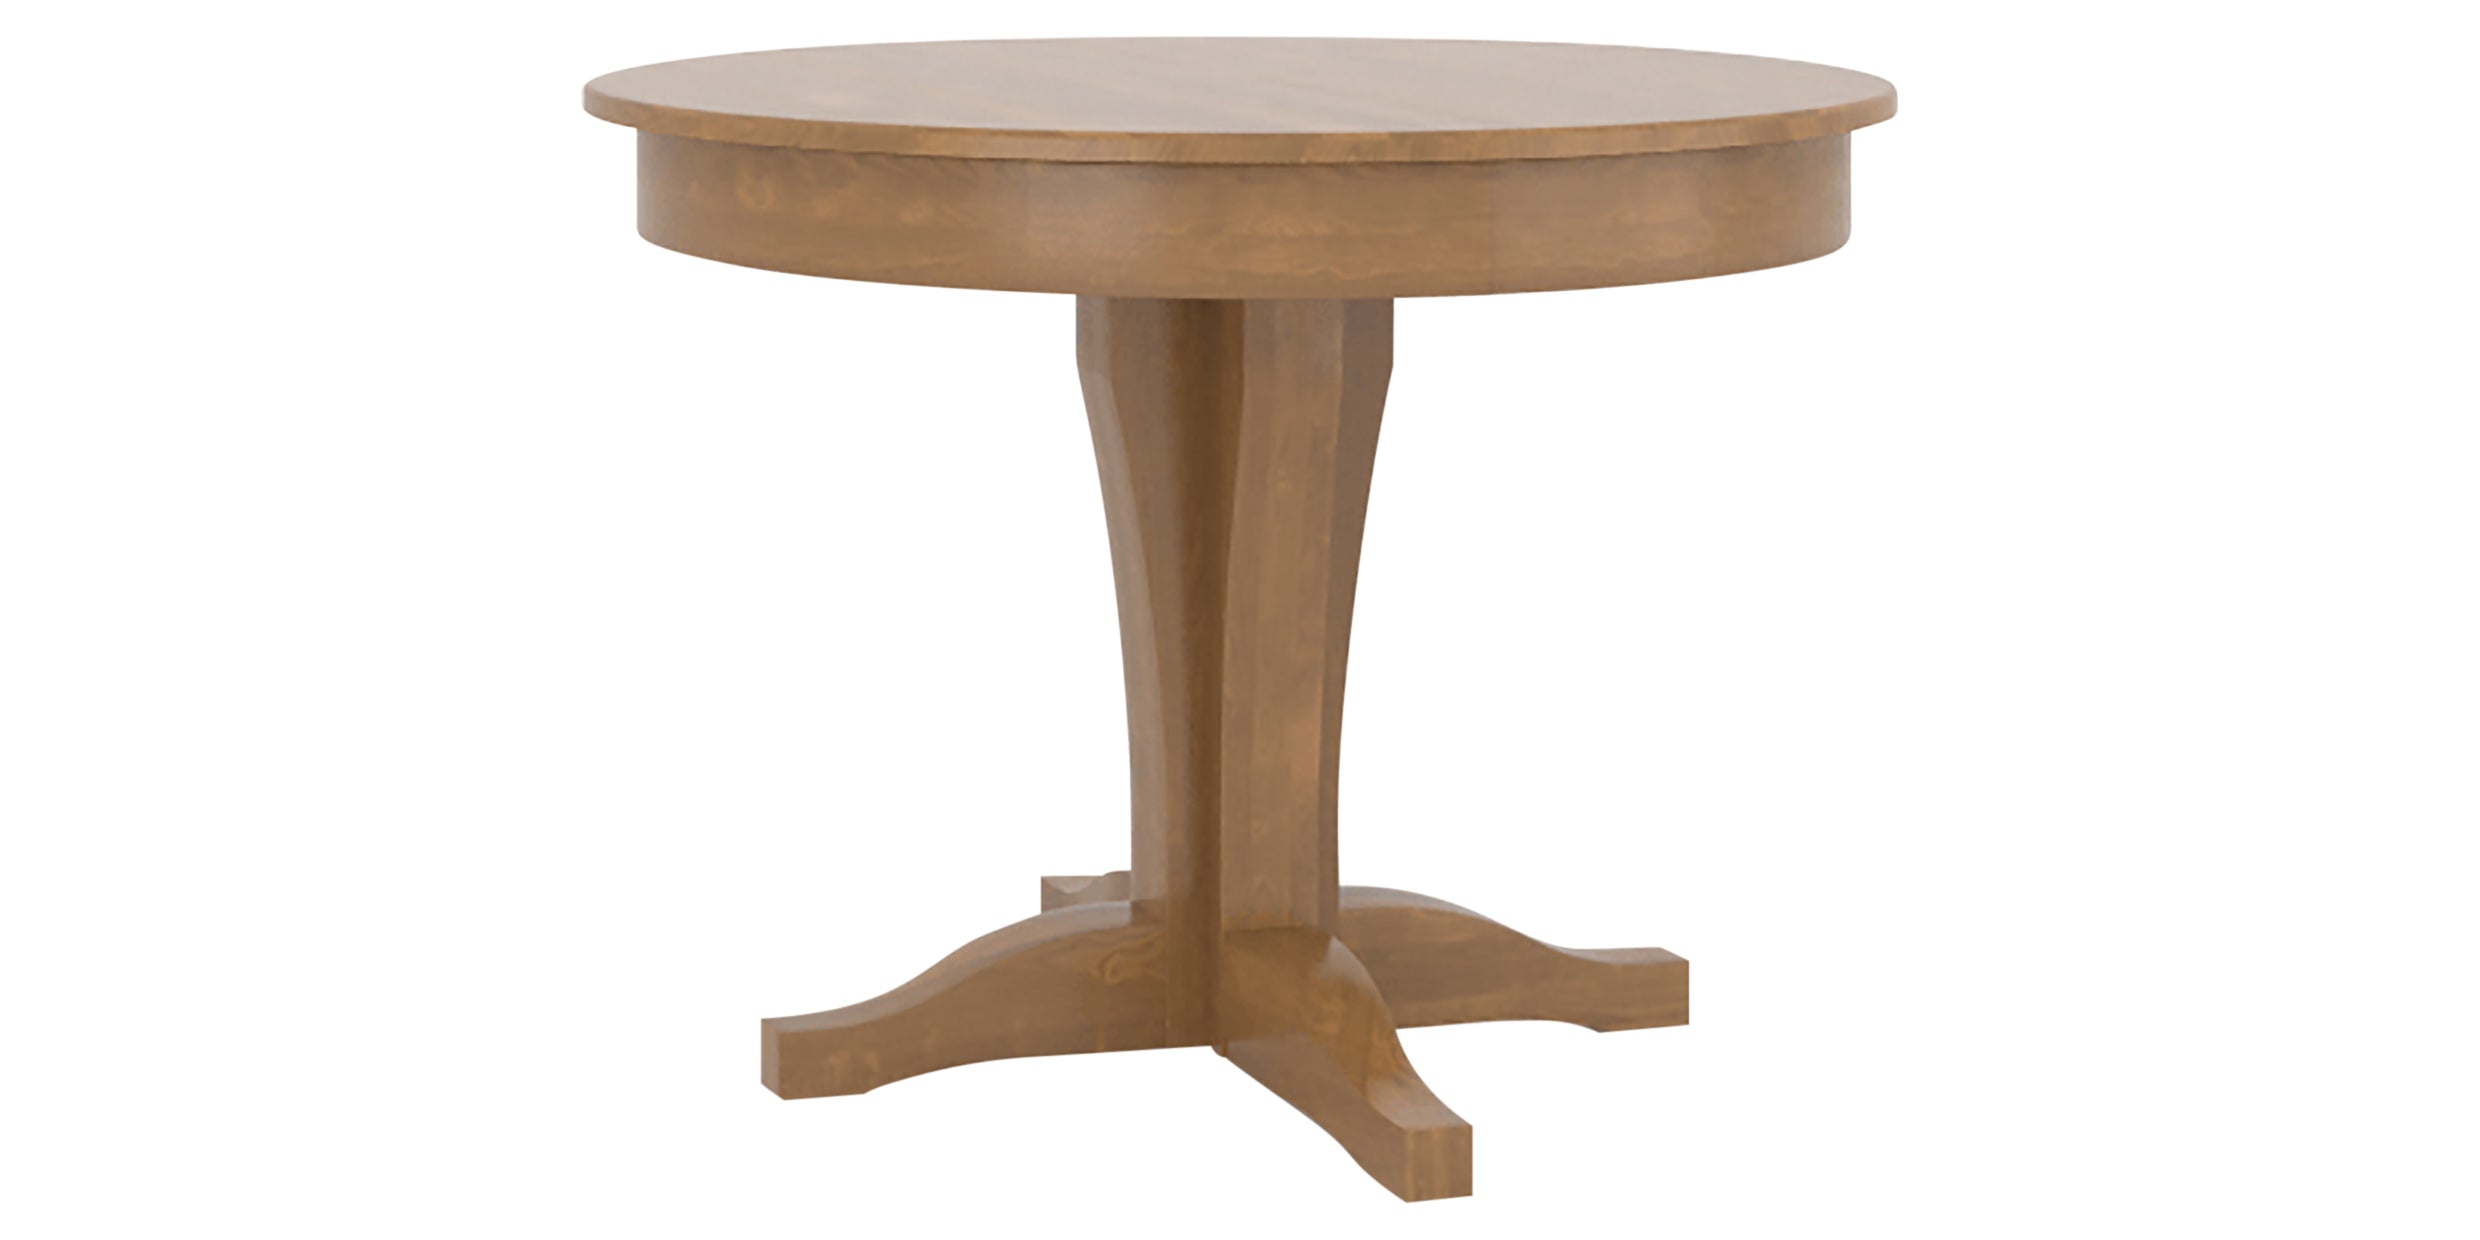 Honey Washed | Canadel Core Dining Table 4242 with XC Base | Valley Ridge Furniture